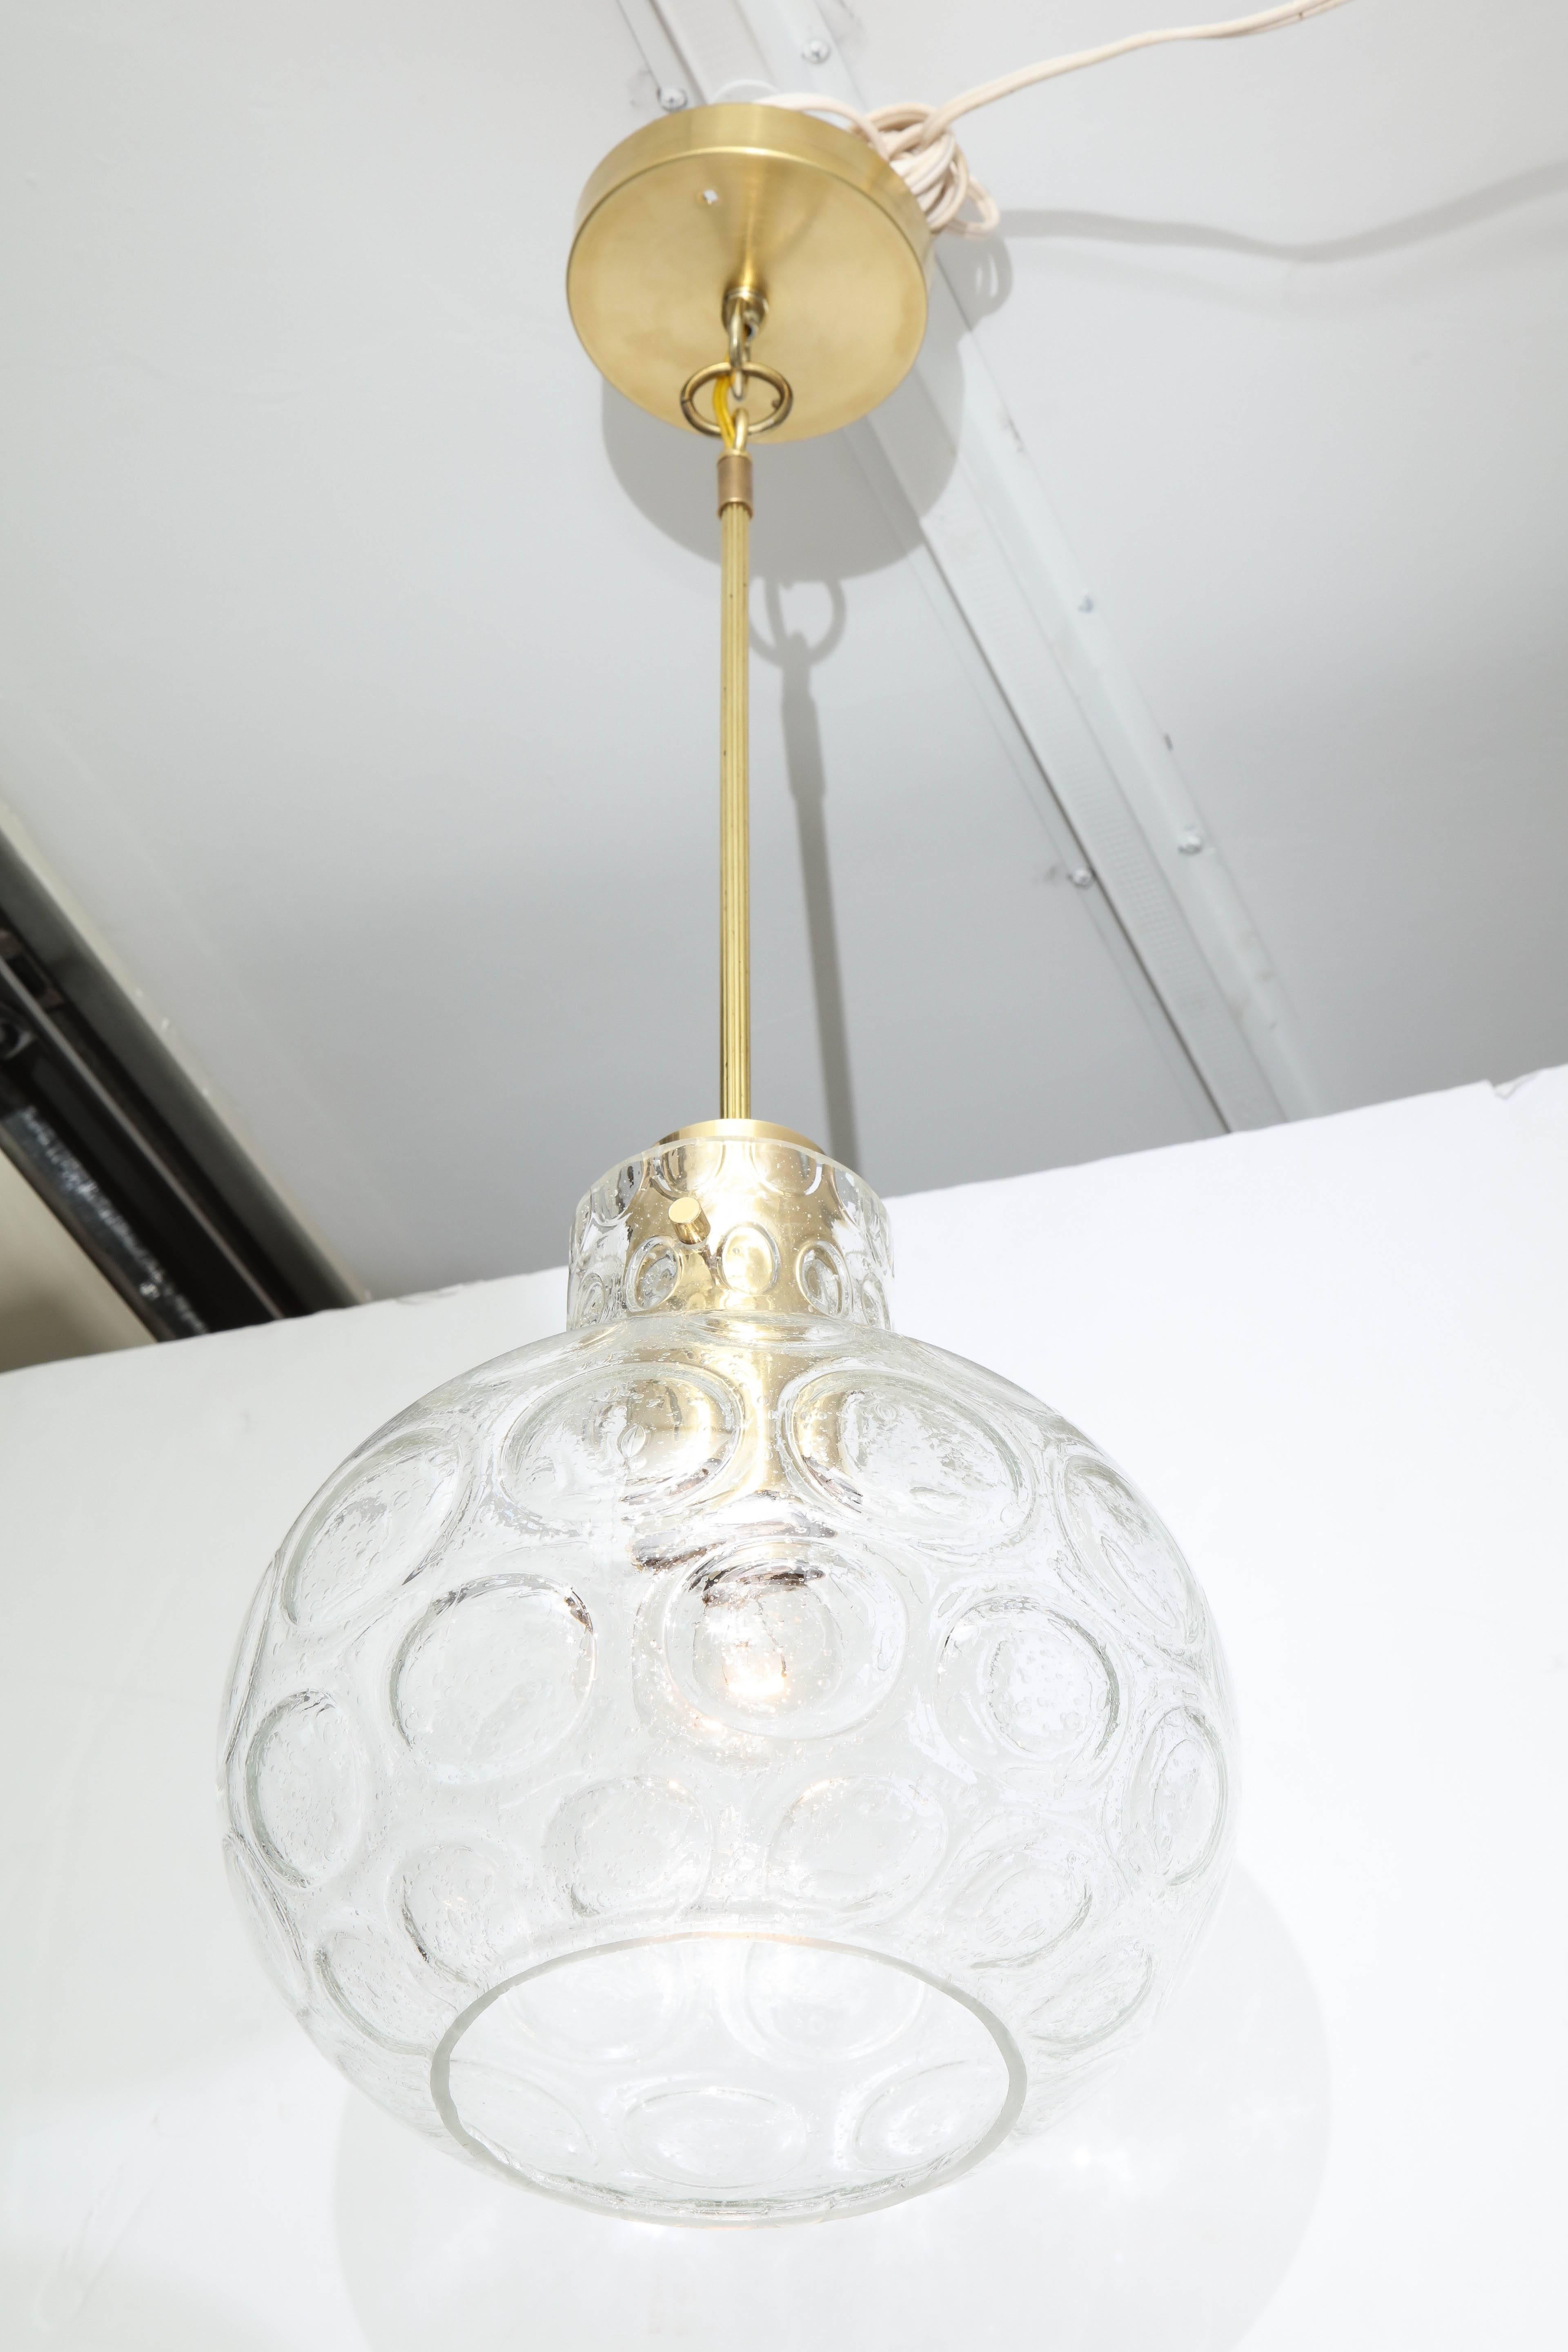 Pair of beautiful pendant lights by Doria.
The blown glass has an incised circle deign and is supported by polished brass hardware. 
The fixtures come with a 12